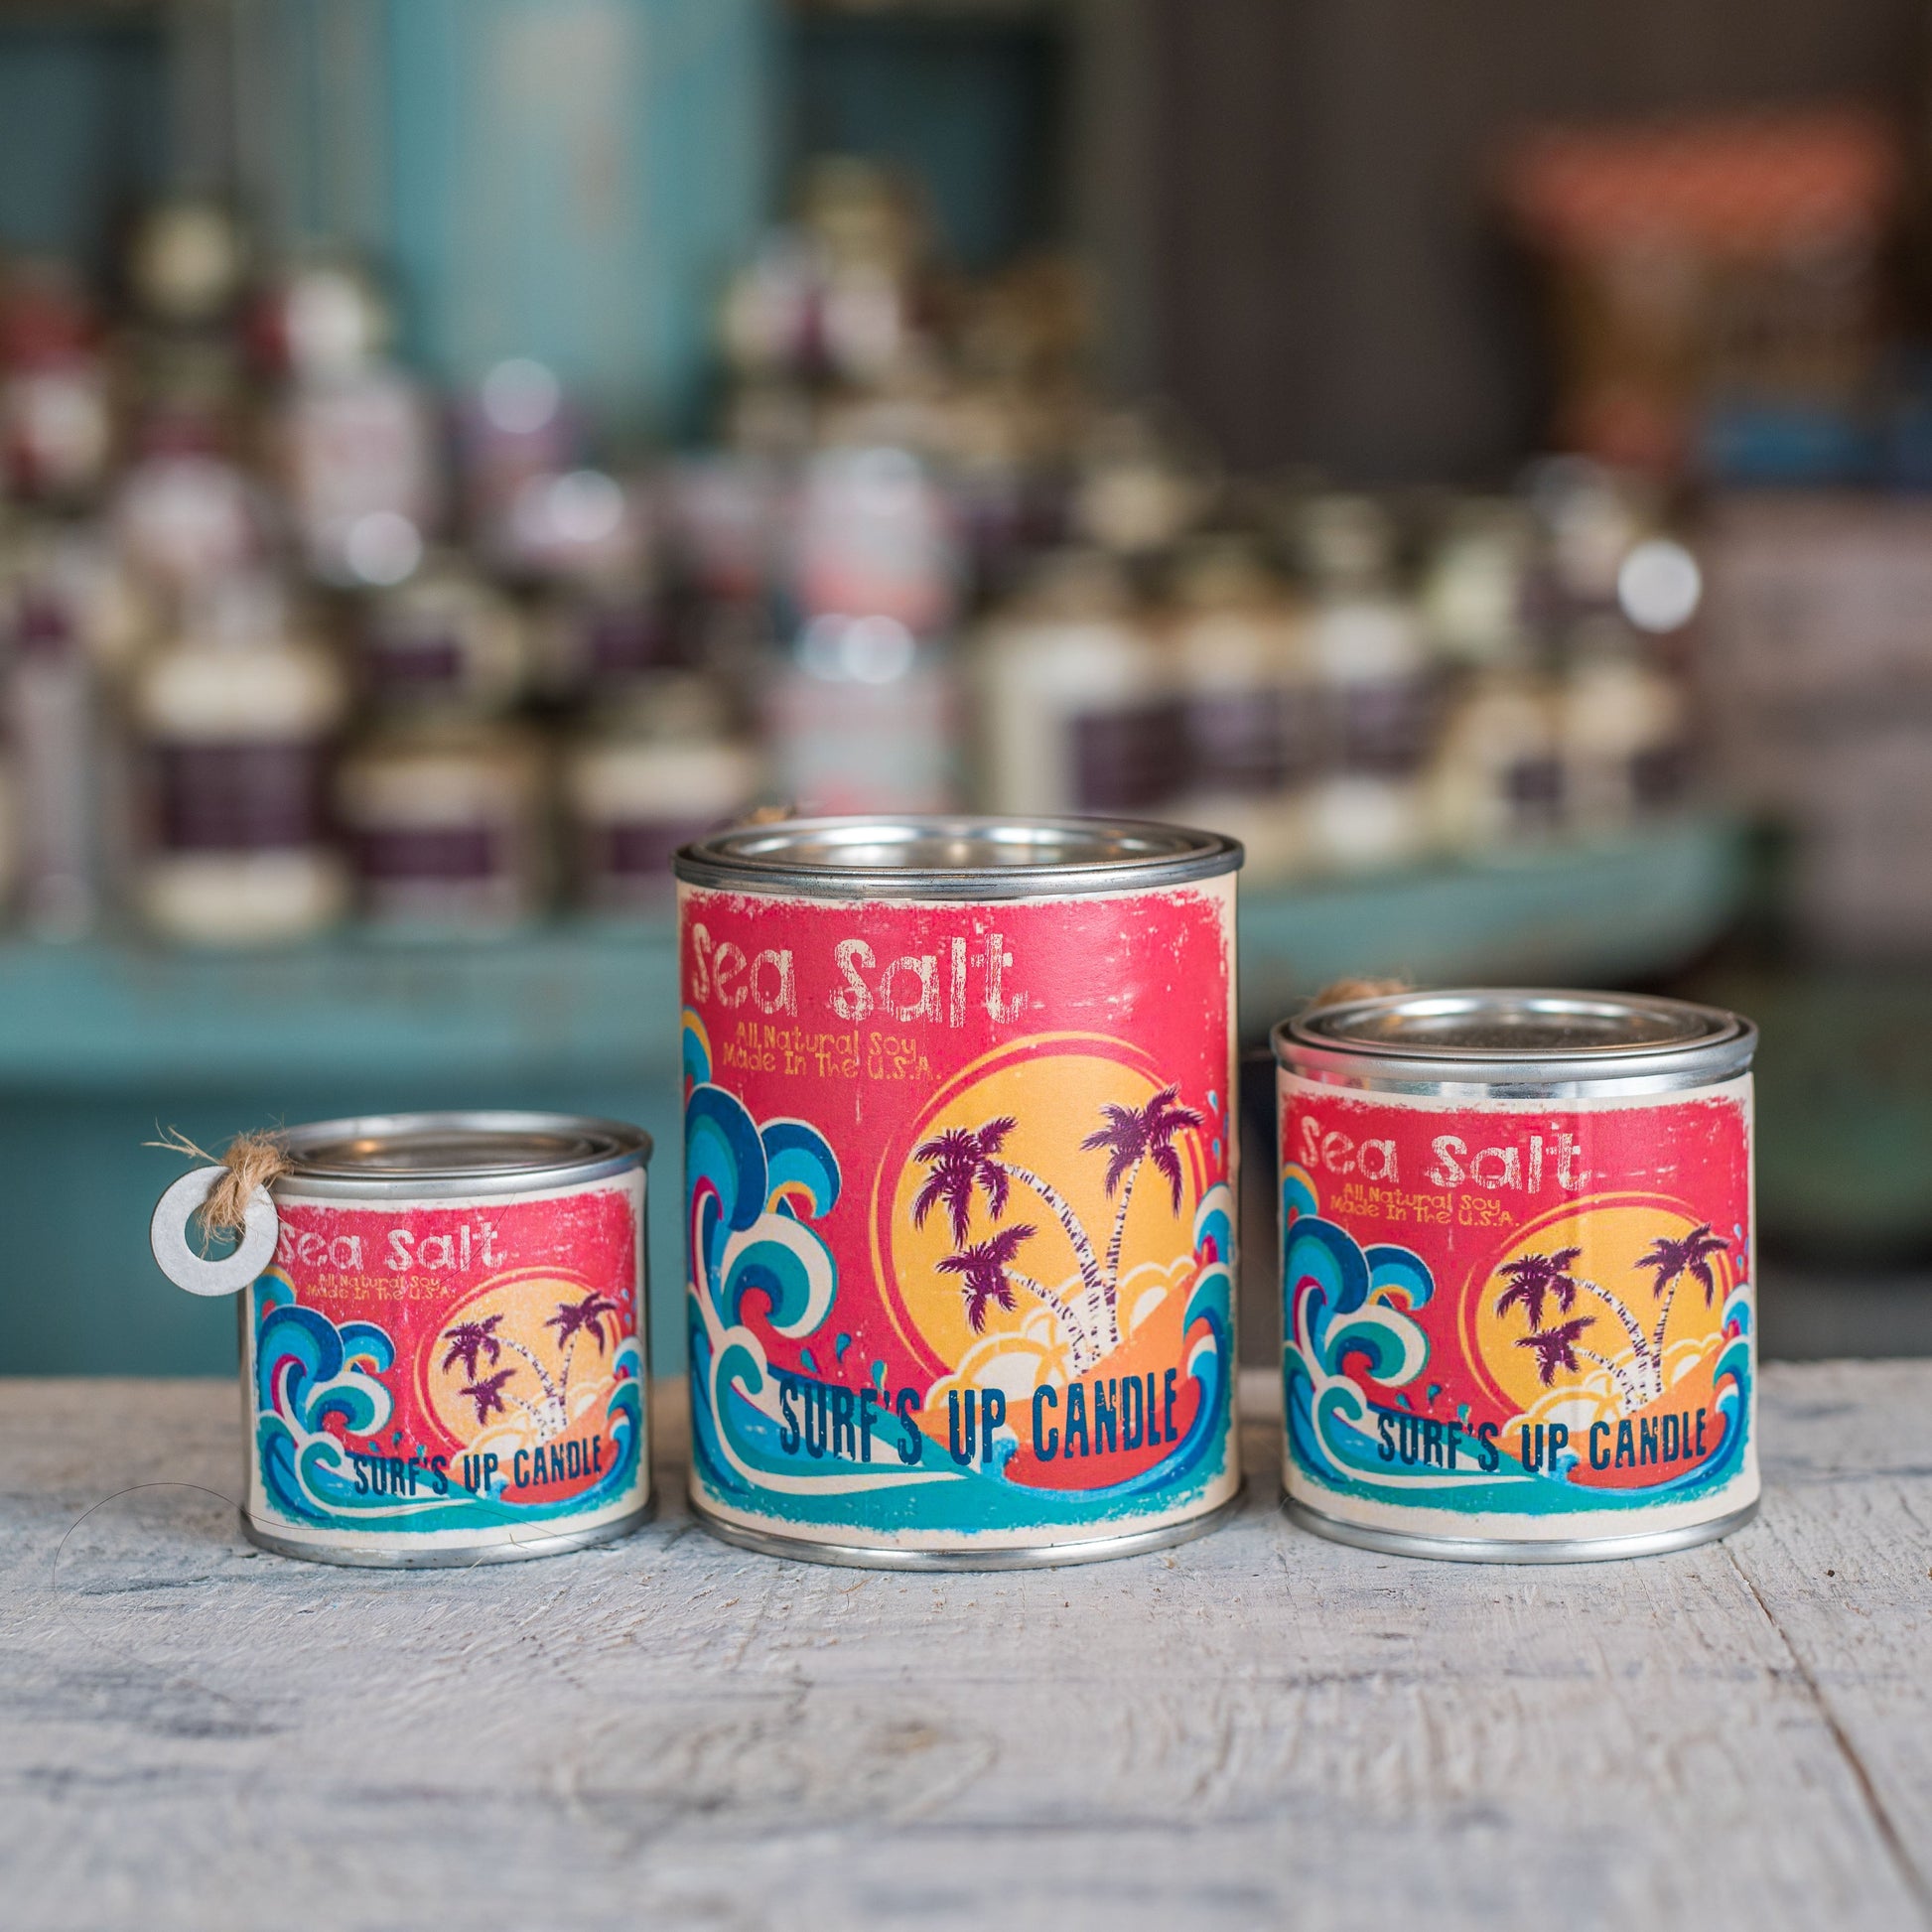 Sea Salt Beach scent paint can all natural soy candle